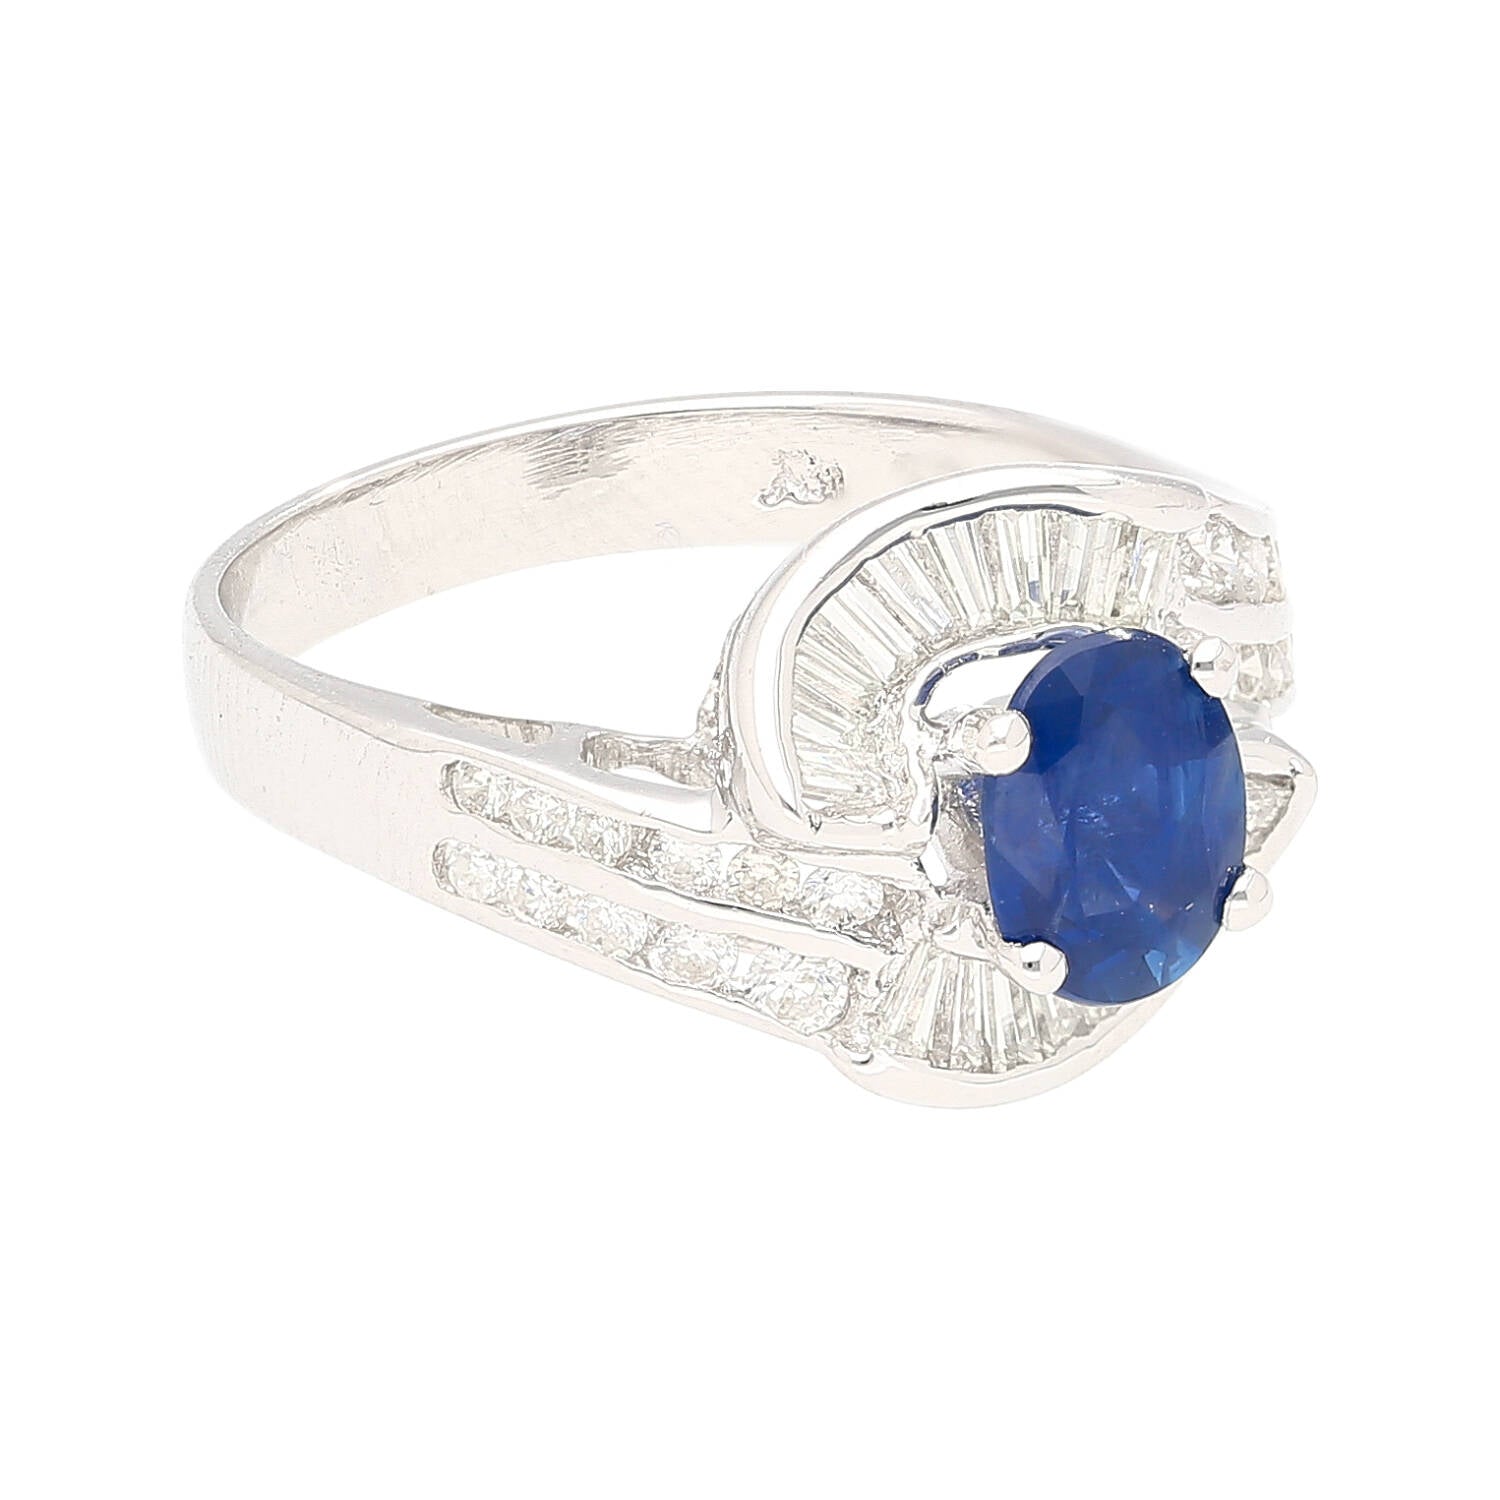 Natural 1.14 Carat Oval Cut Blue Sapphire with Round & Baguette Cut Diamonds in a Swirled 18K White Gold Ring Setting